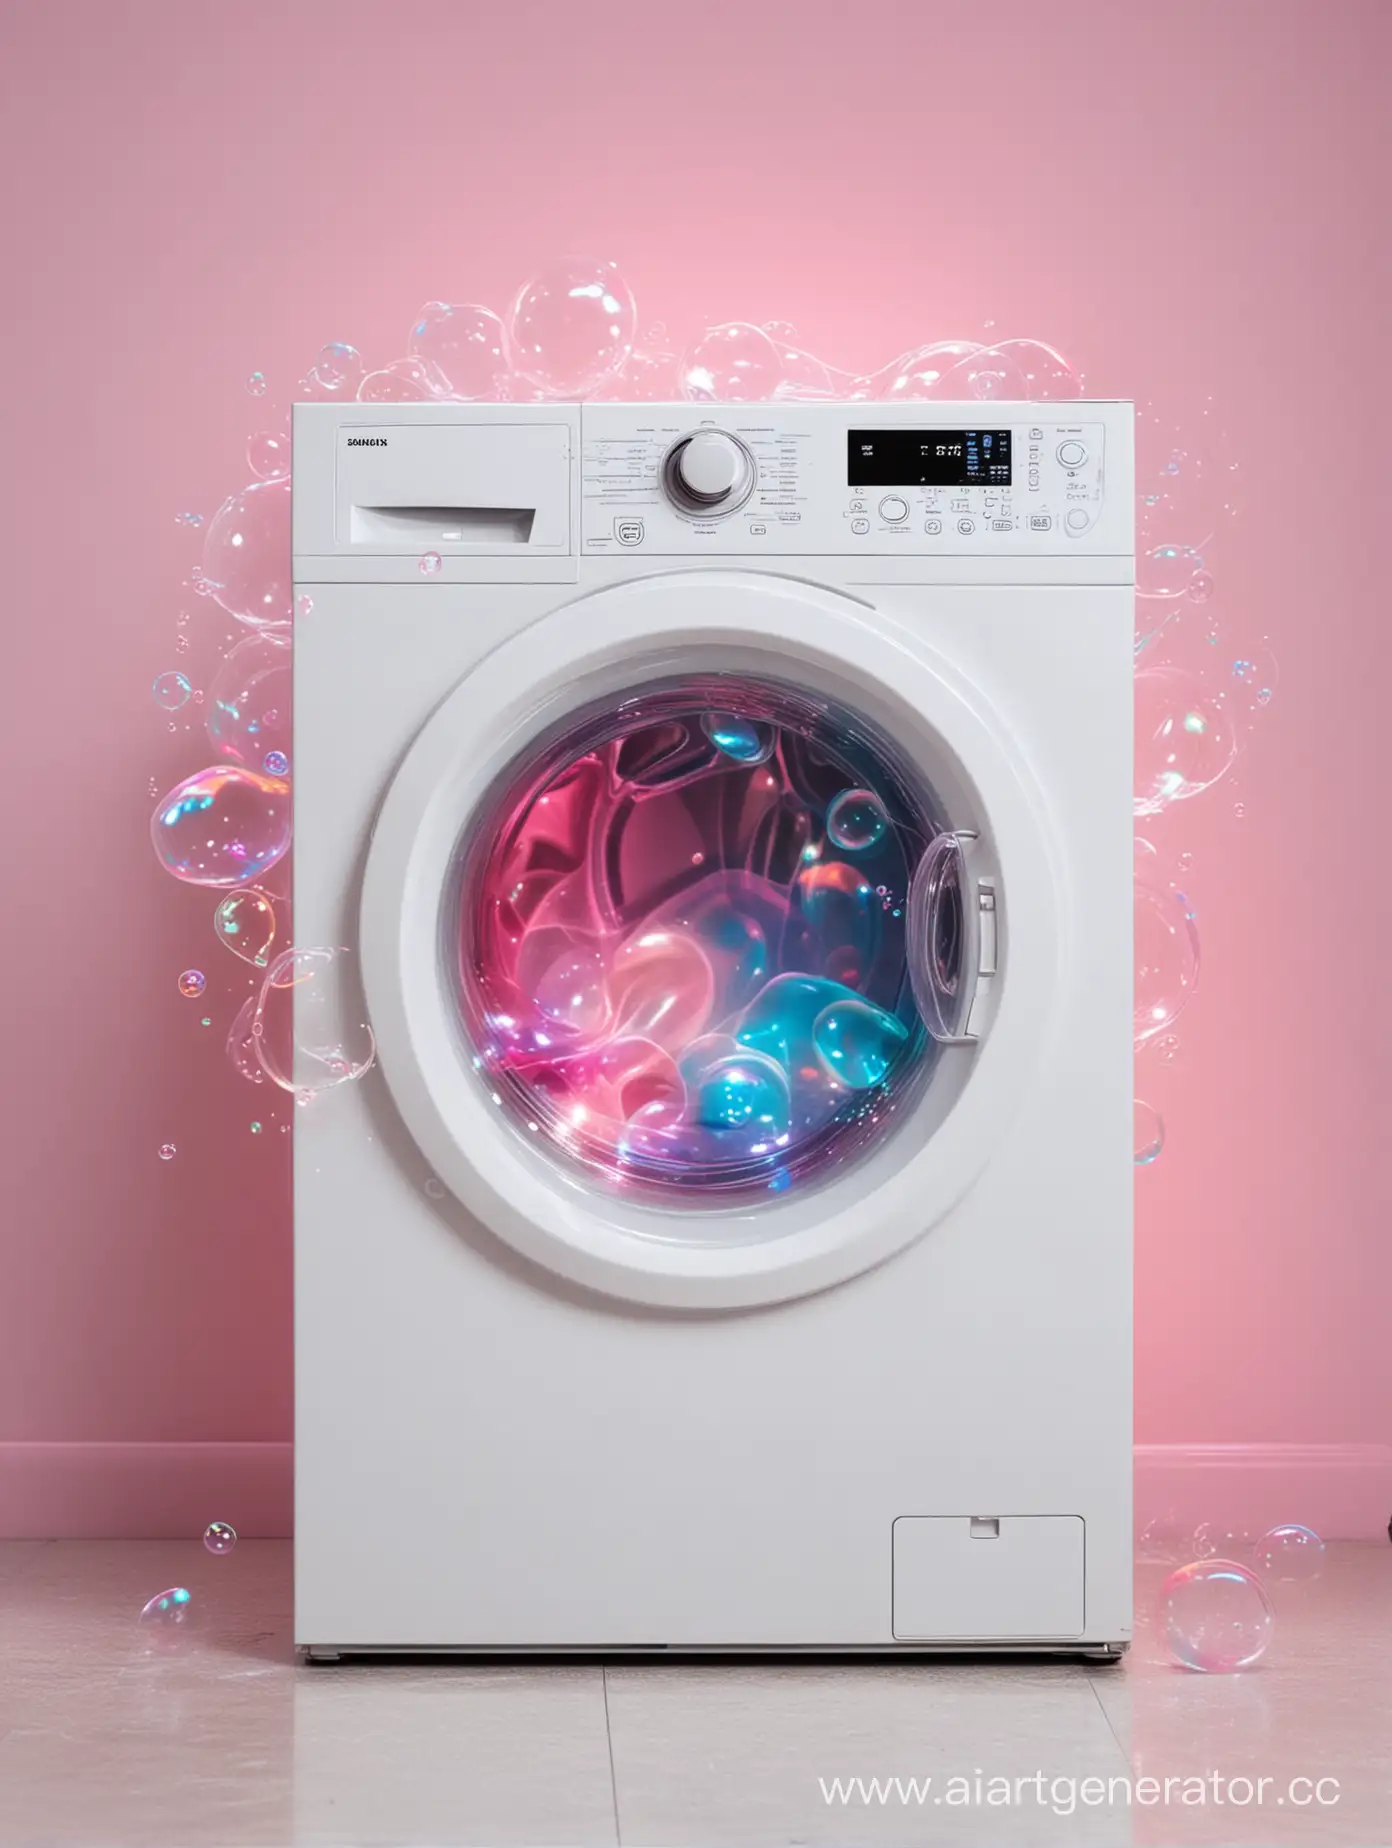 Delightful-Family-Fun-with-Flying-Soap-Bubbles-and-NeonLit-Washing-Machine